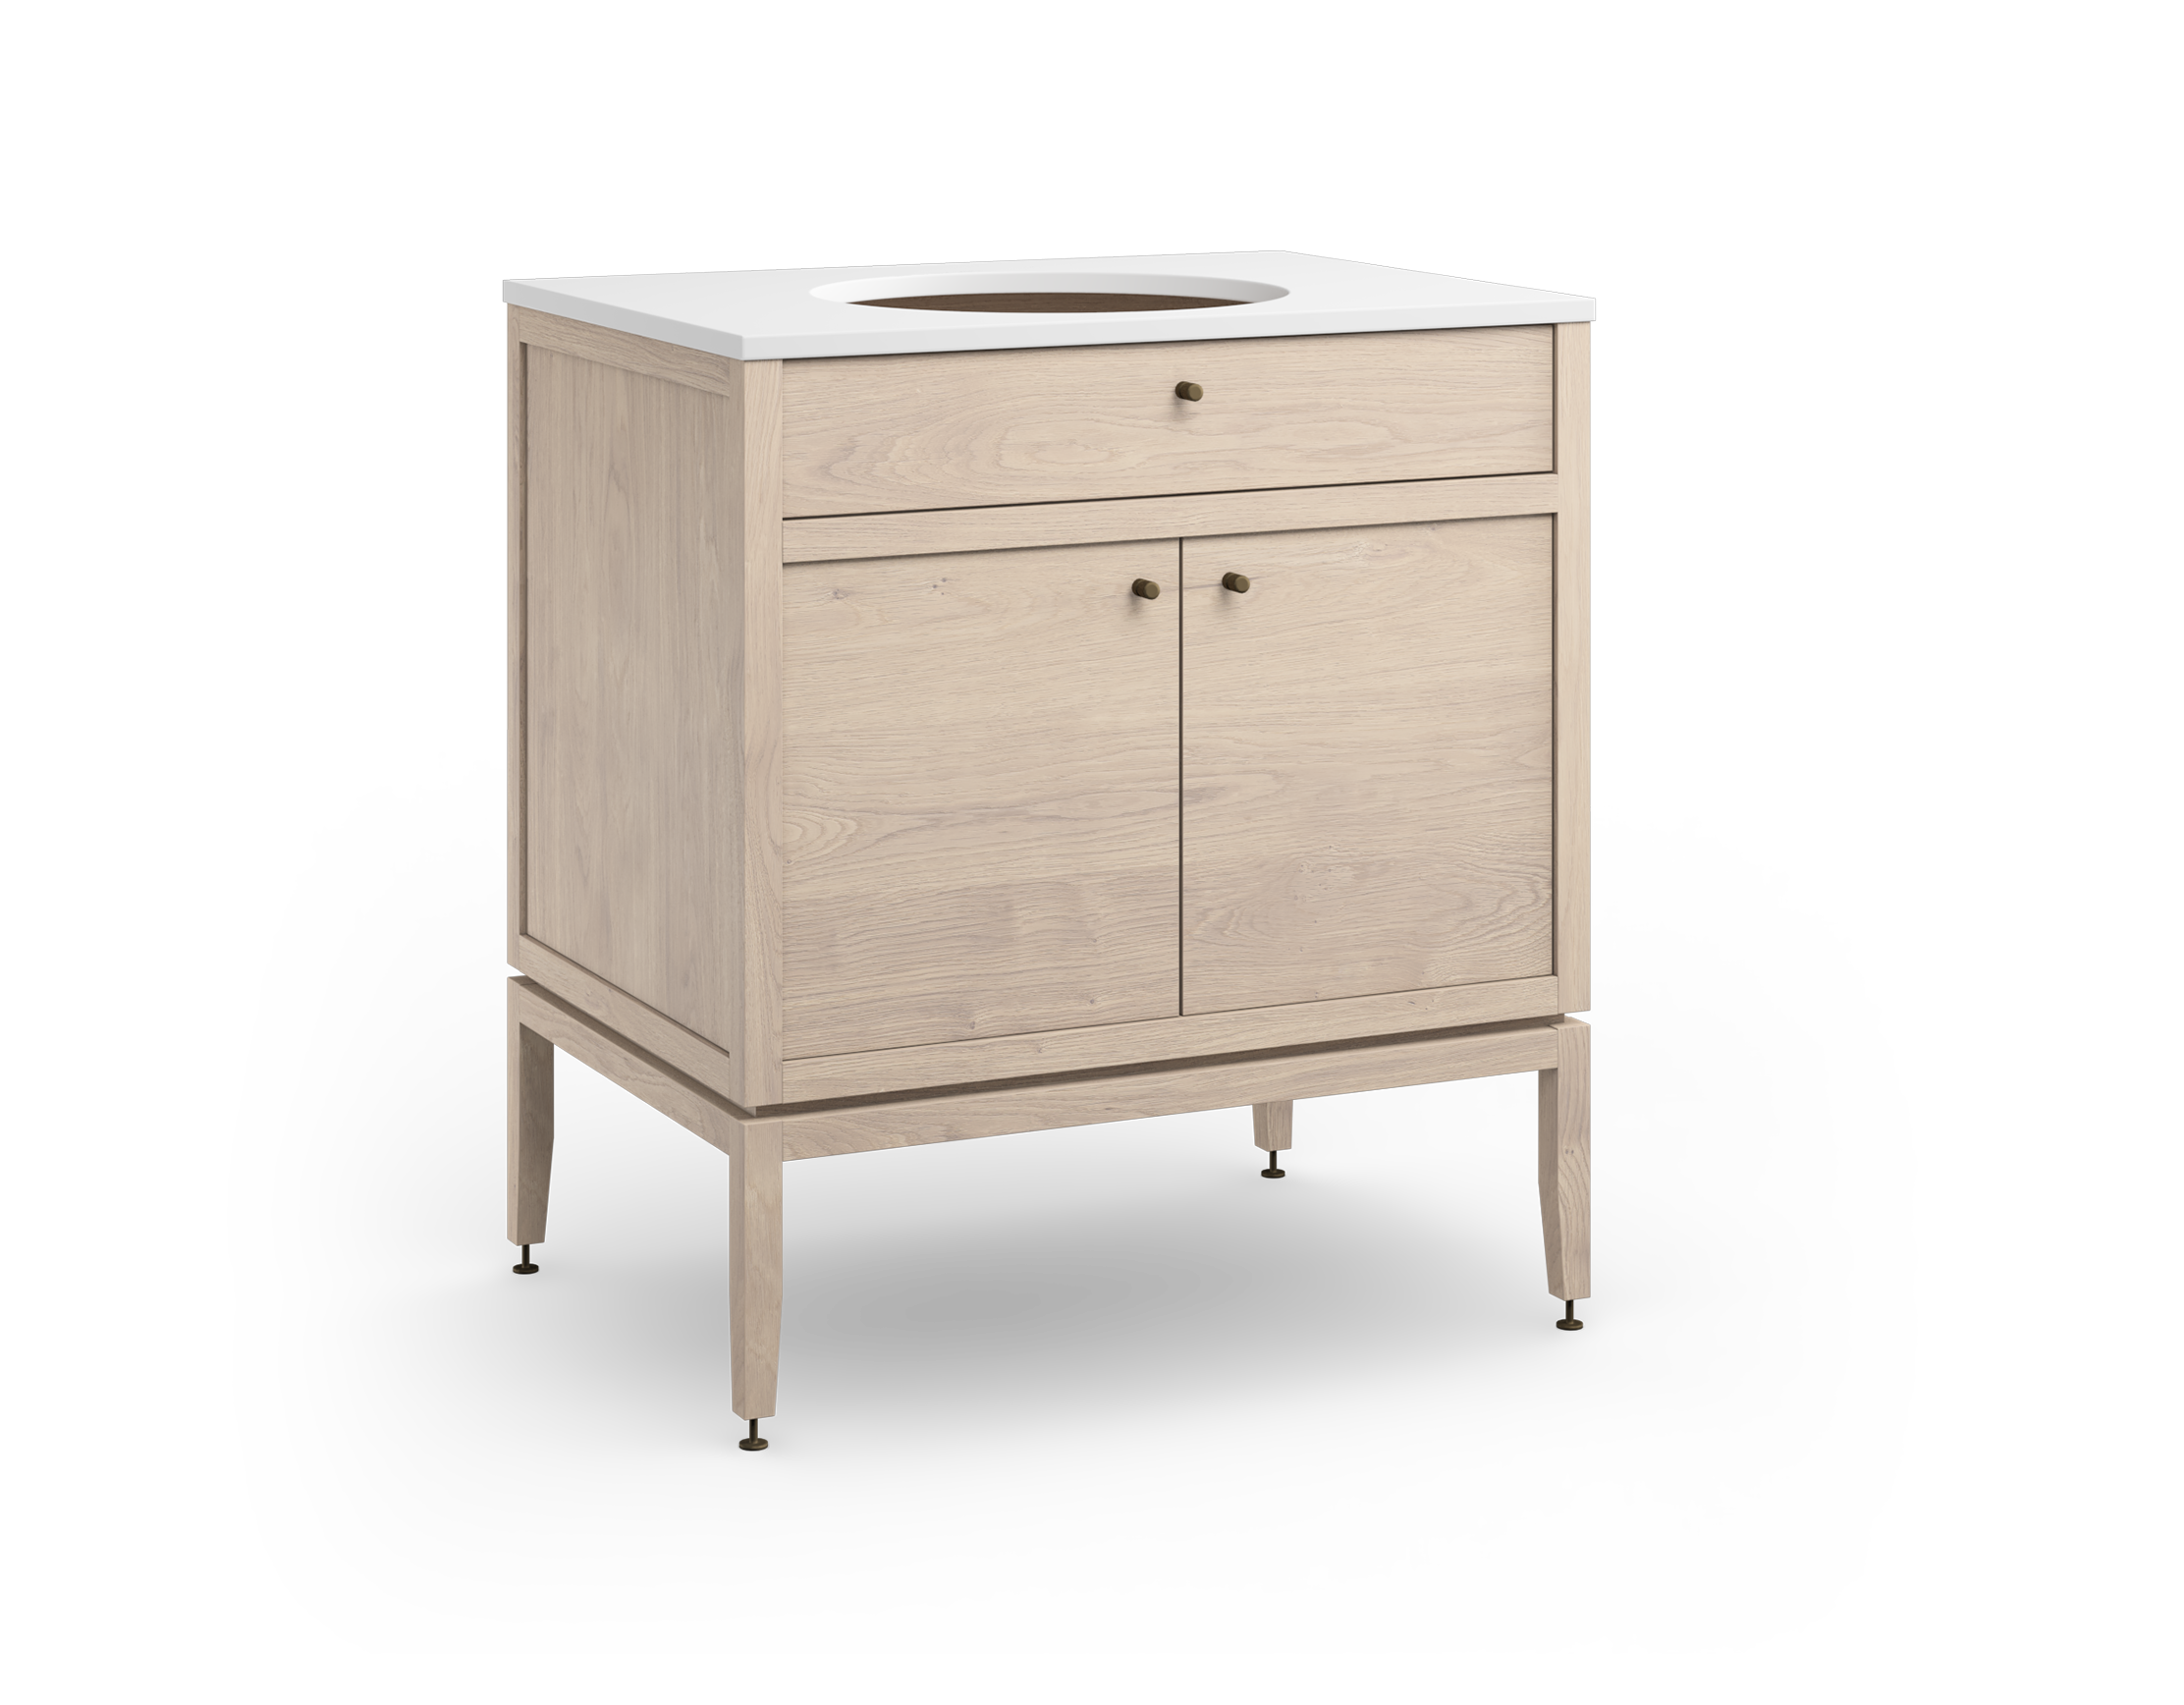 Coquo modular bathroom vanity with fix front and two doors in white stained oak.